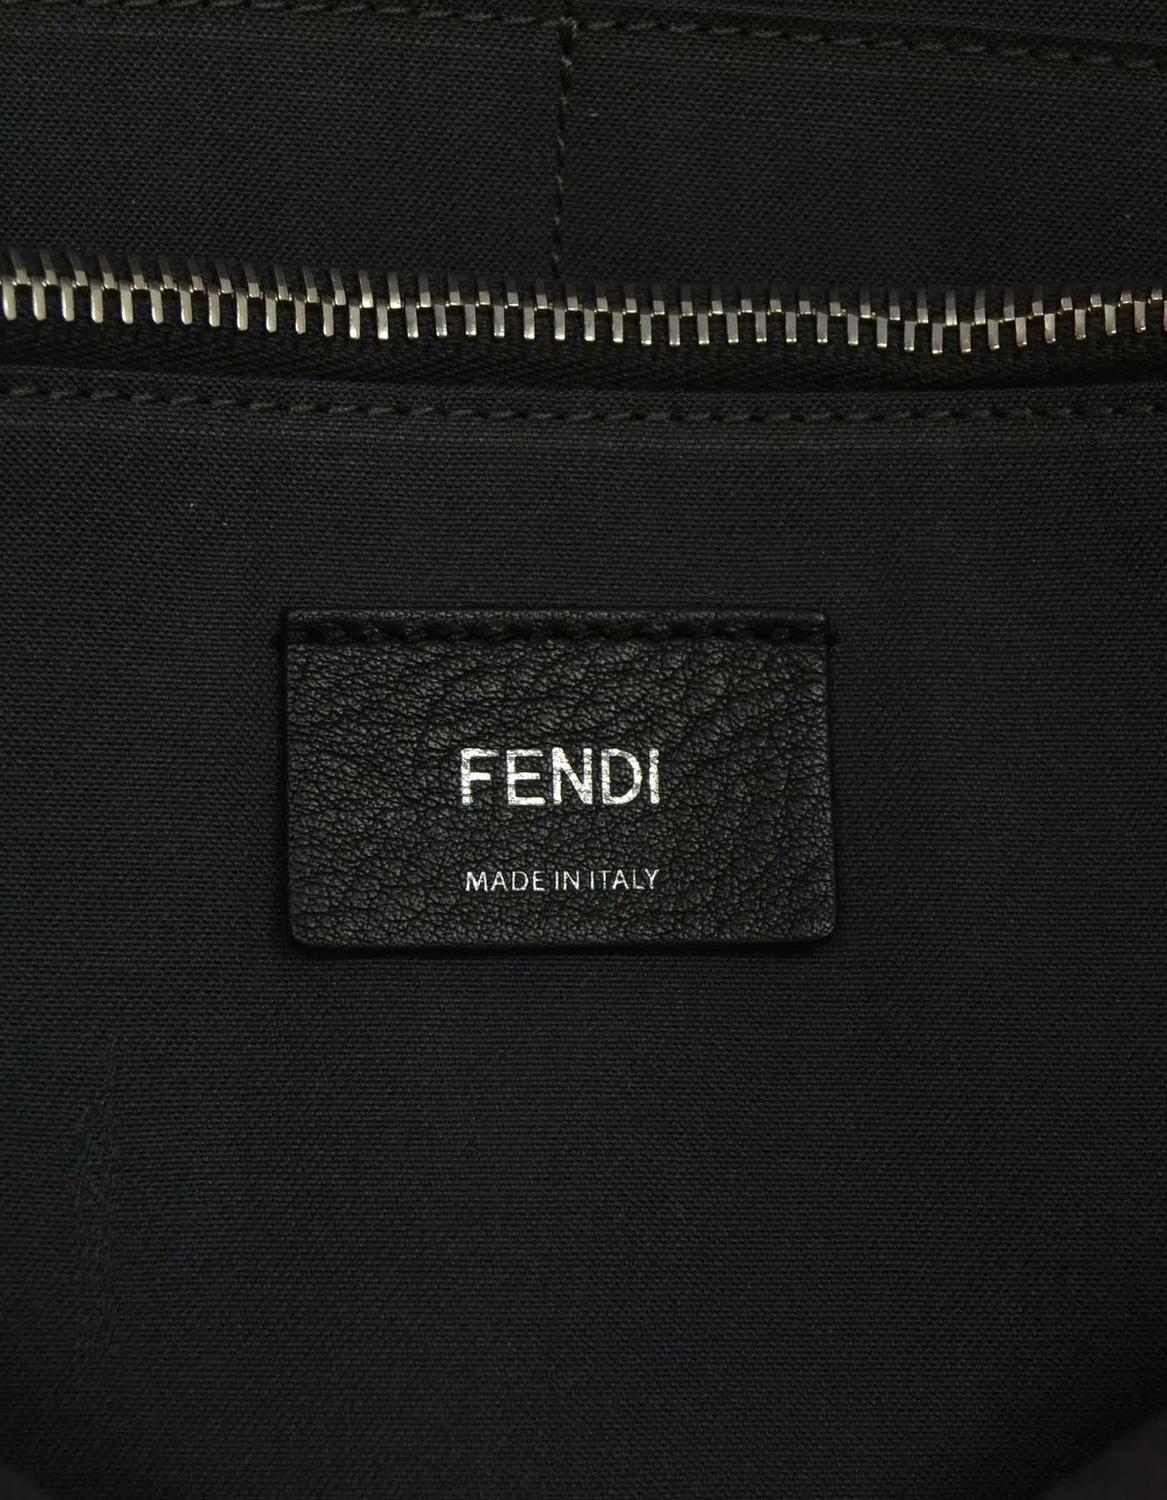 Fendi Tri-Color Large By The Way Bag SHW For Sale at 1stdibs